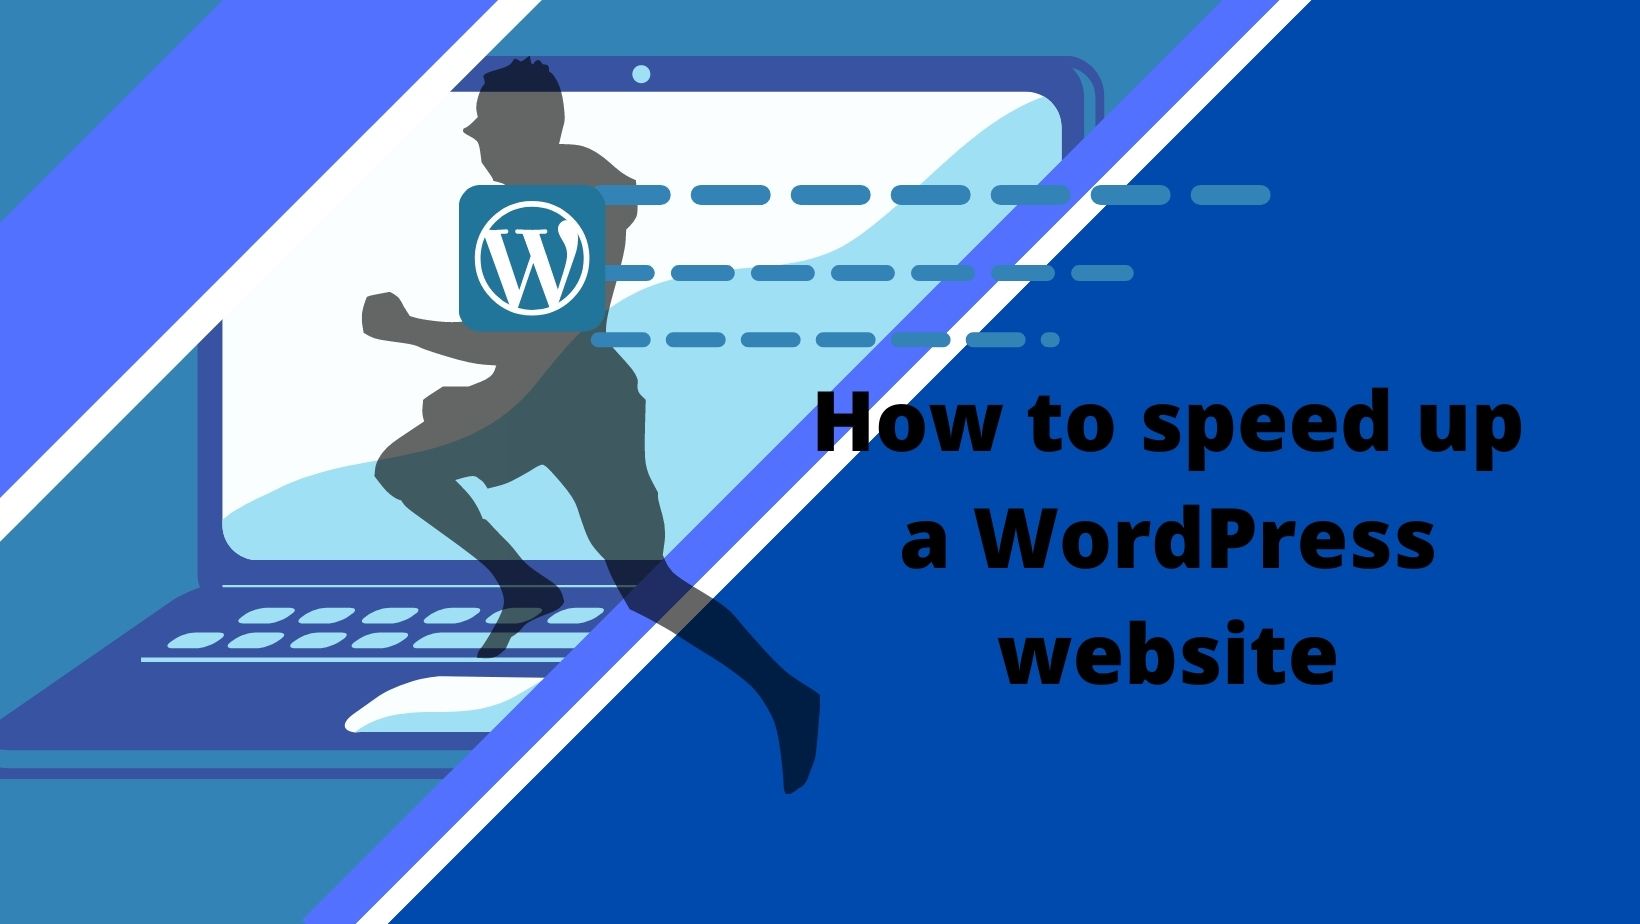 How to speed up a WordPress website